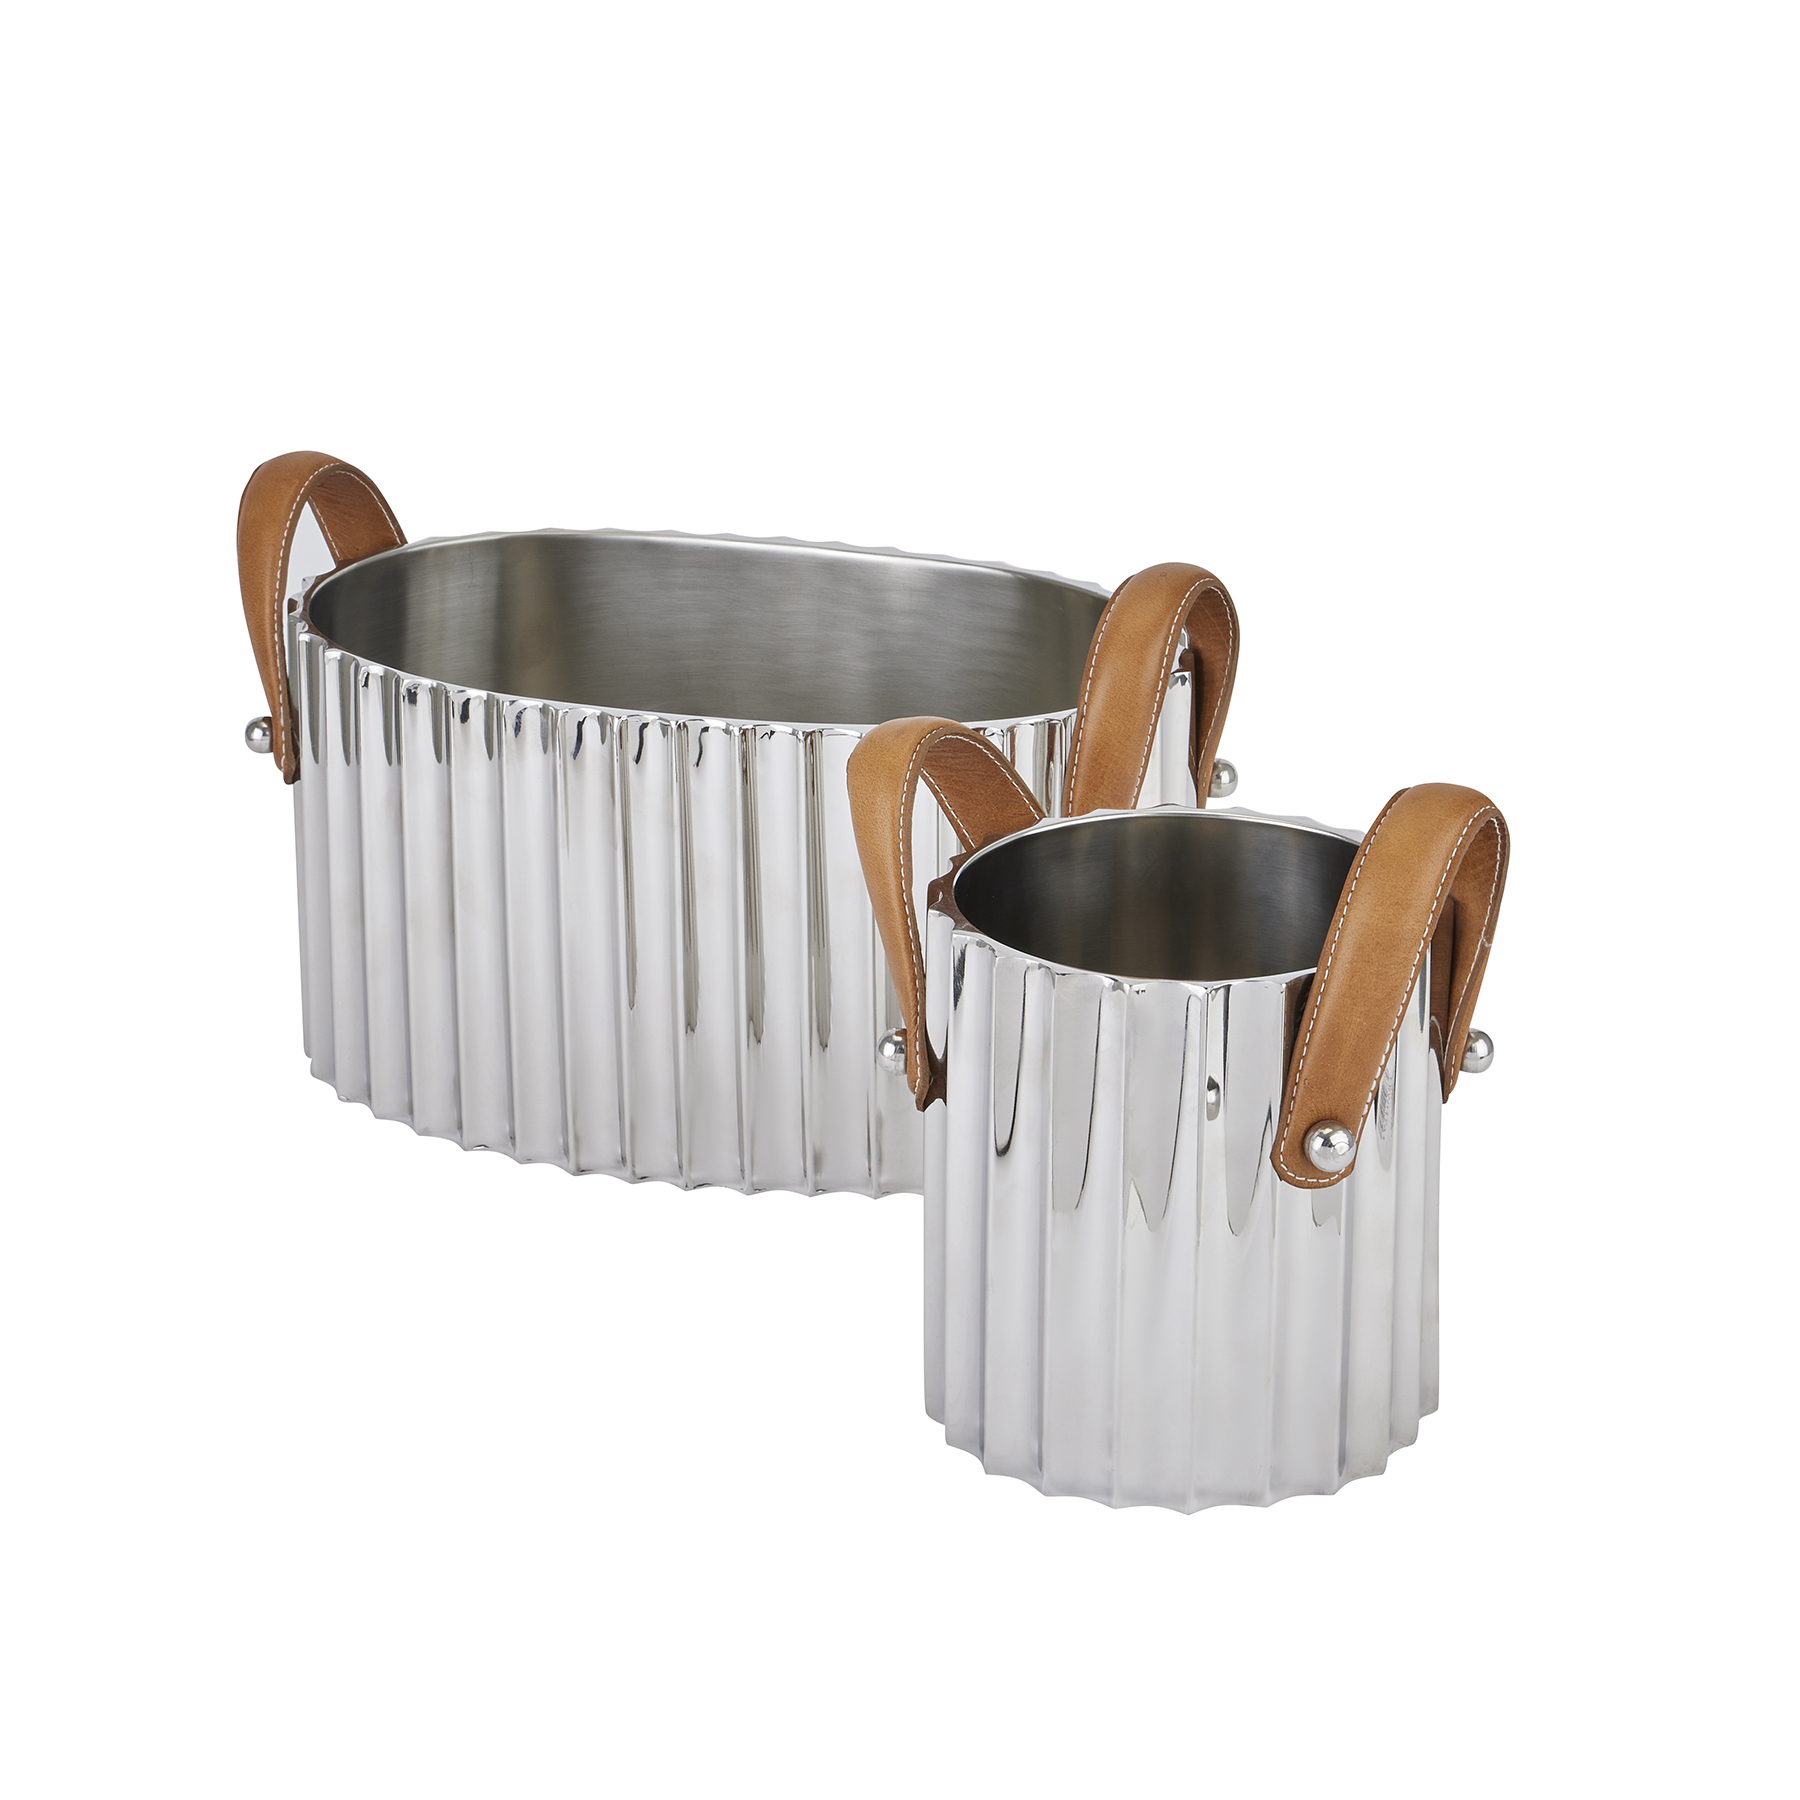 Silver Fluted Leather Handled Single Champagne Cooler - Image 3